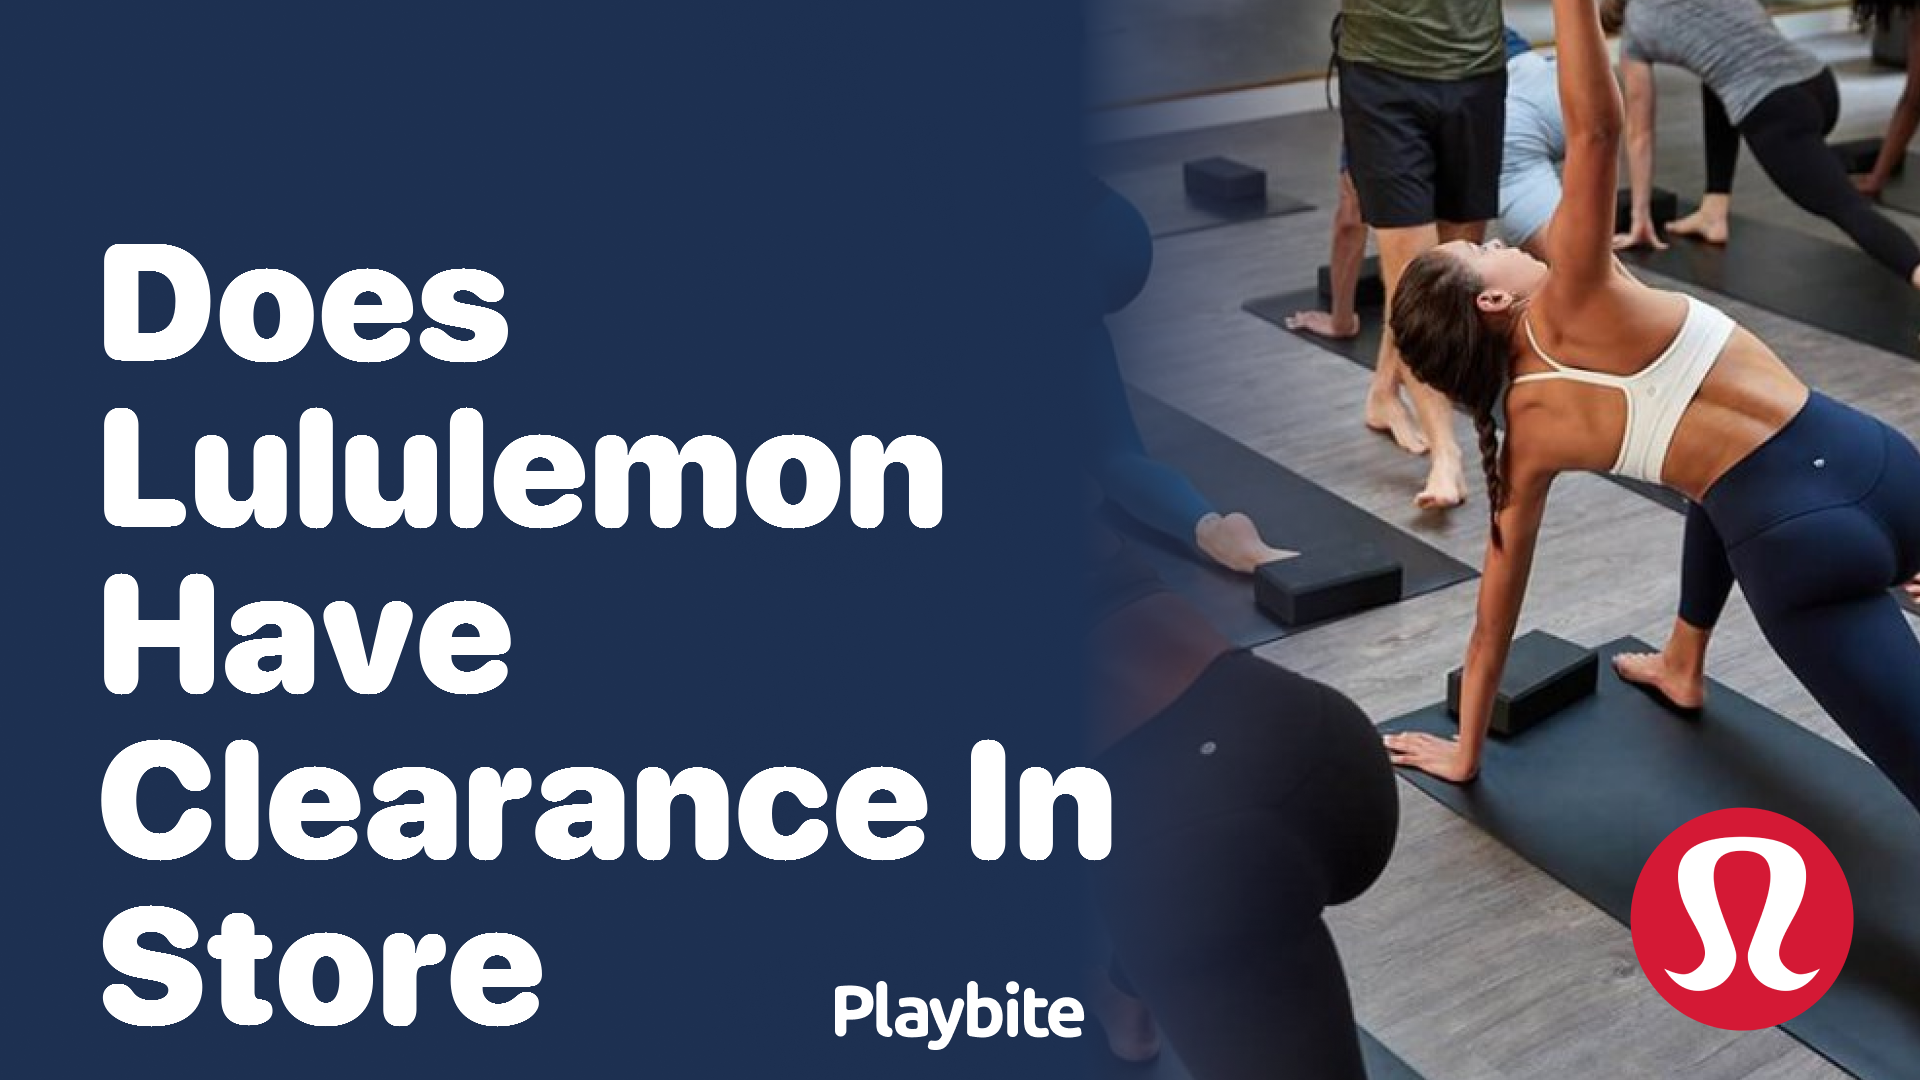 Does Lululemon Have Clearance Sales in Store? - Playbite